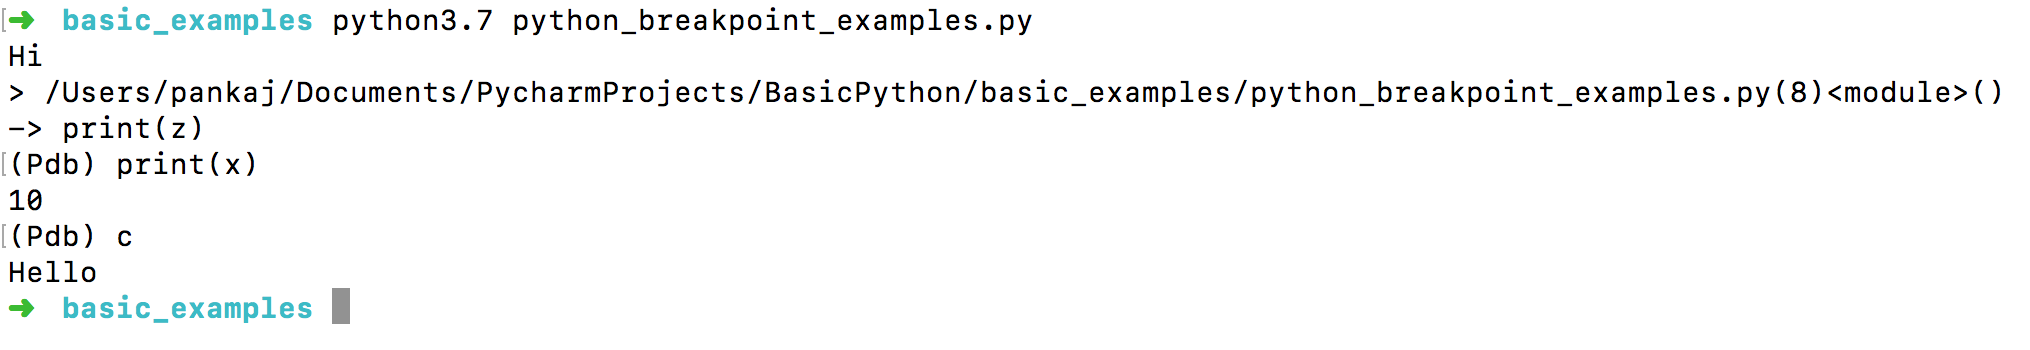 python breakpoint example